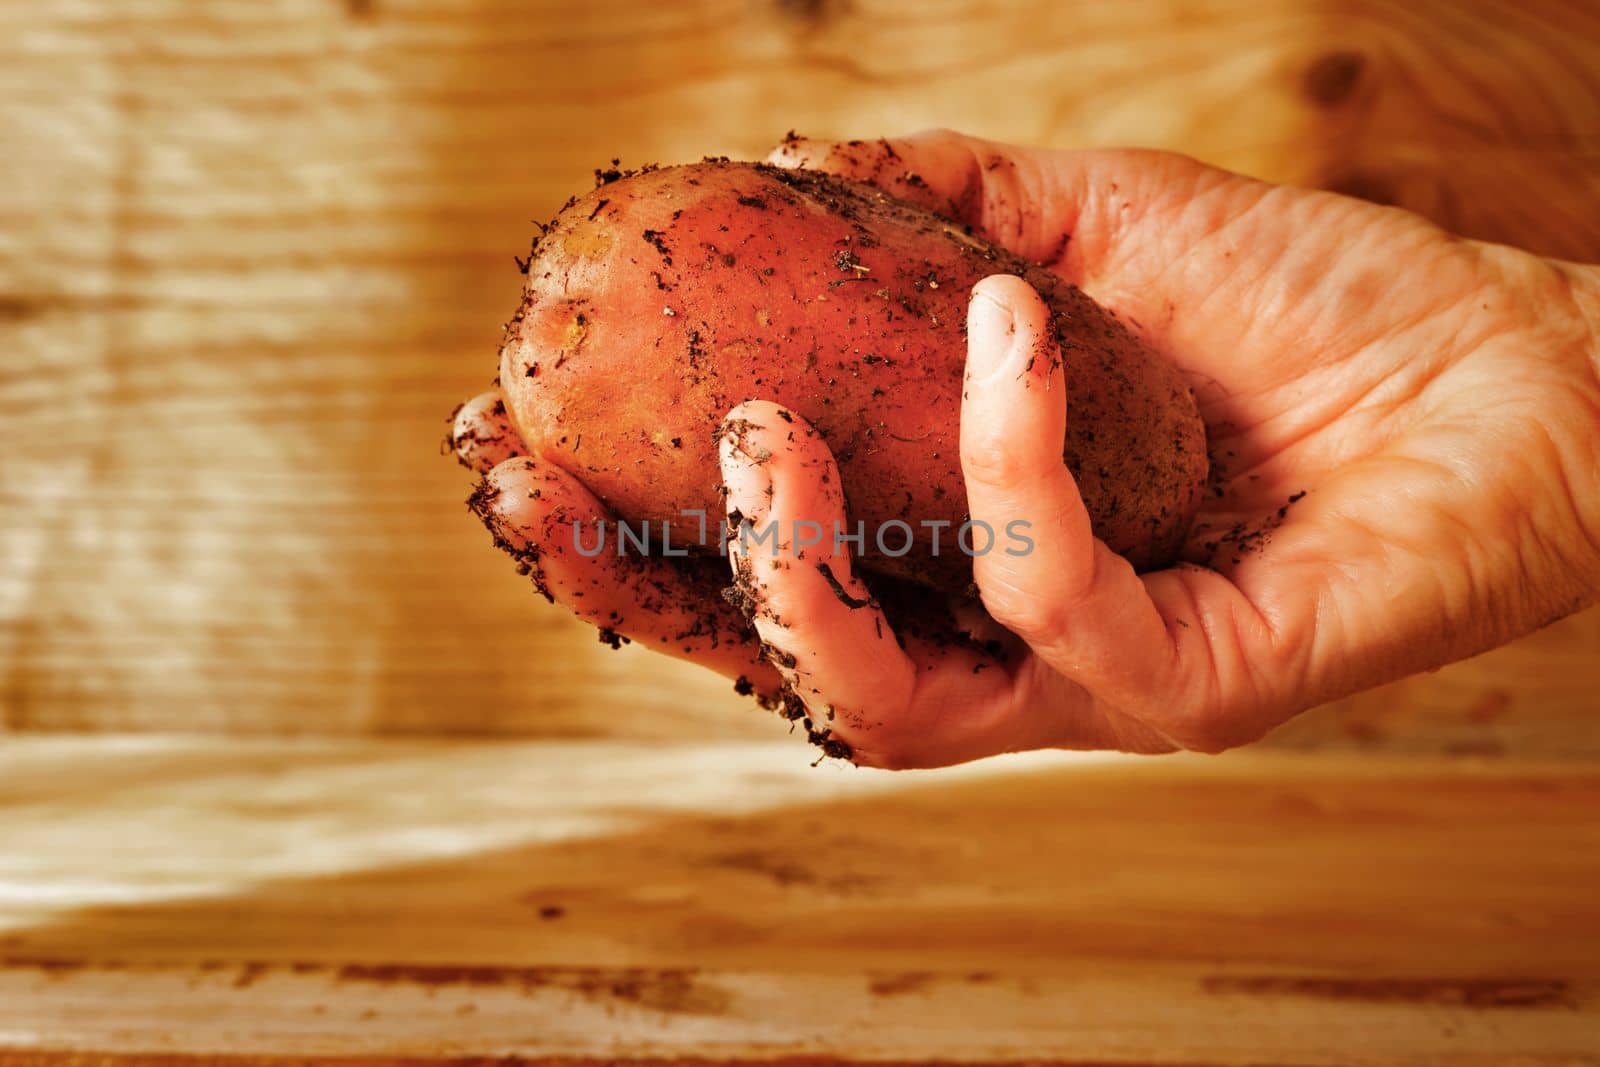 Harvested potato with soil on dirty hand , agricultural occupation